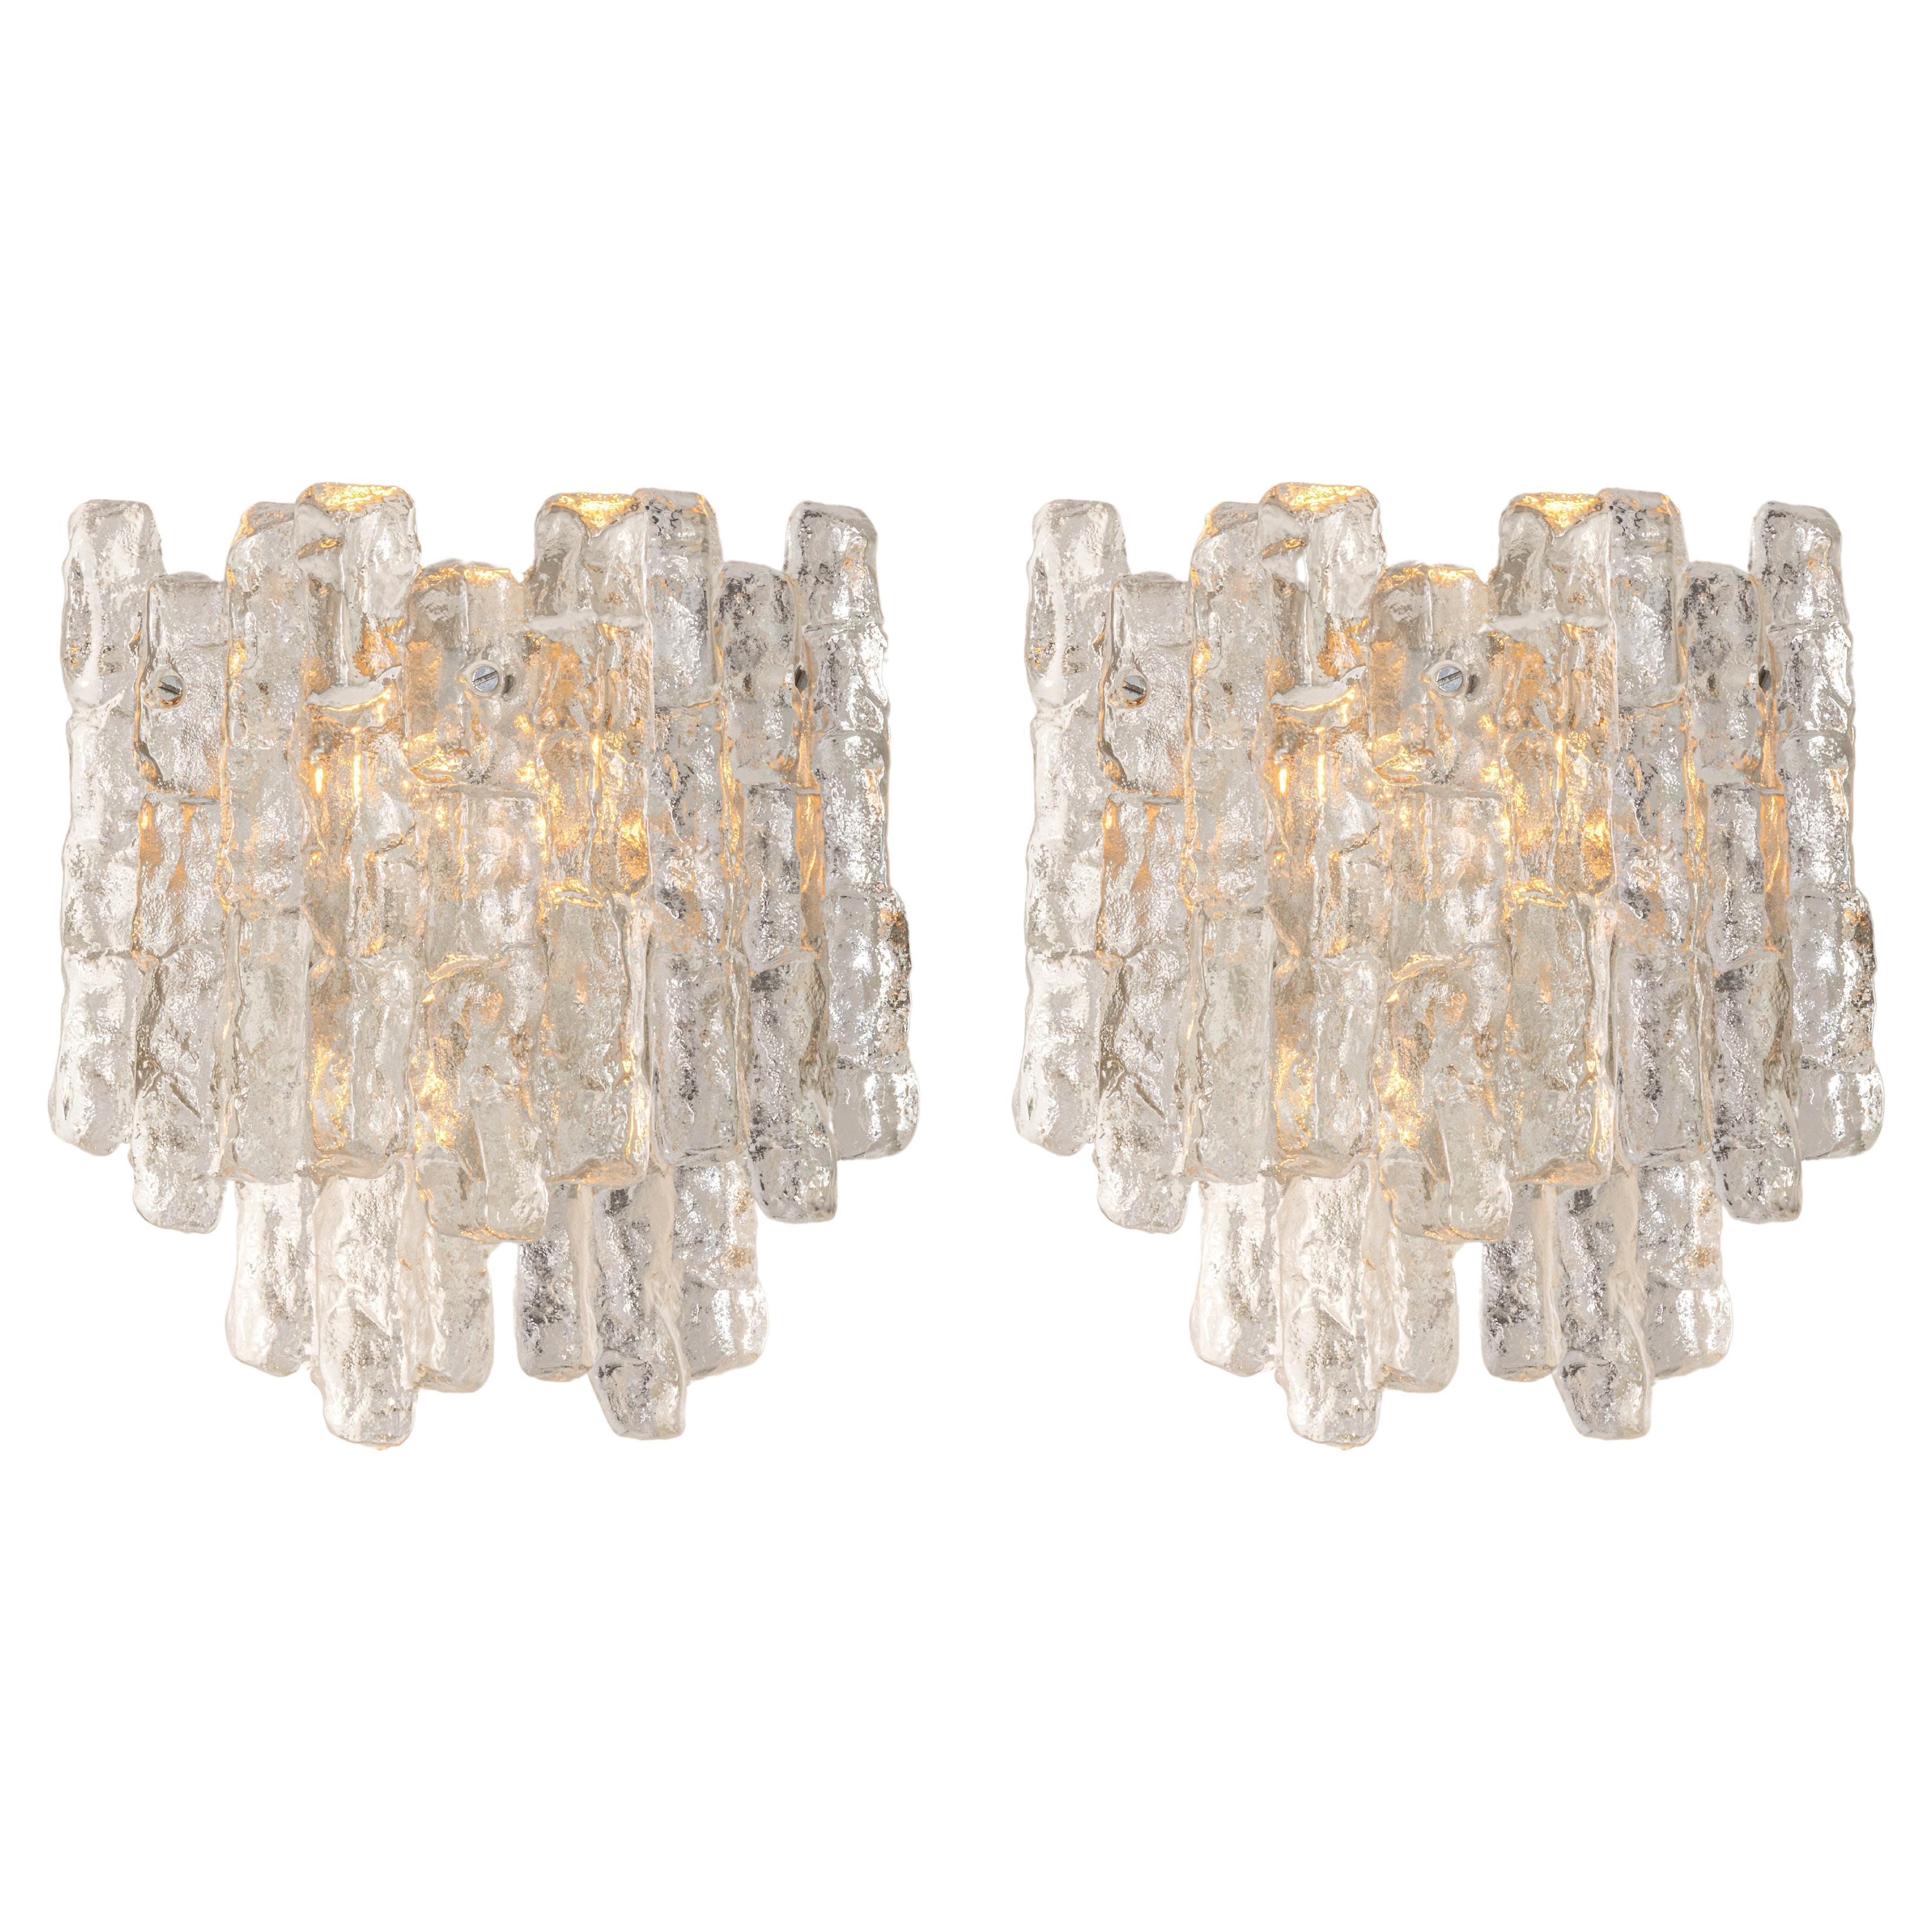 Pair of Large Kalmar Sconces Murano Wall Lights, Austria, 1960s For Sale